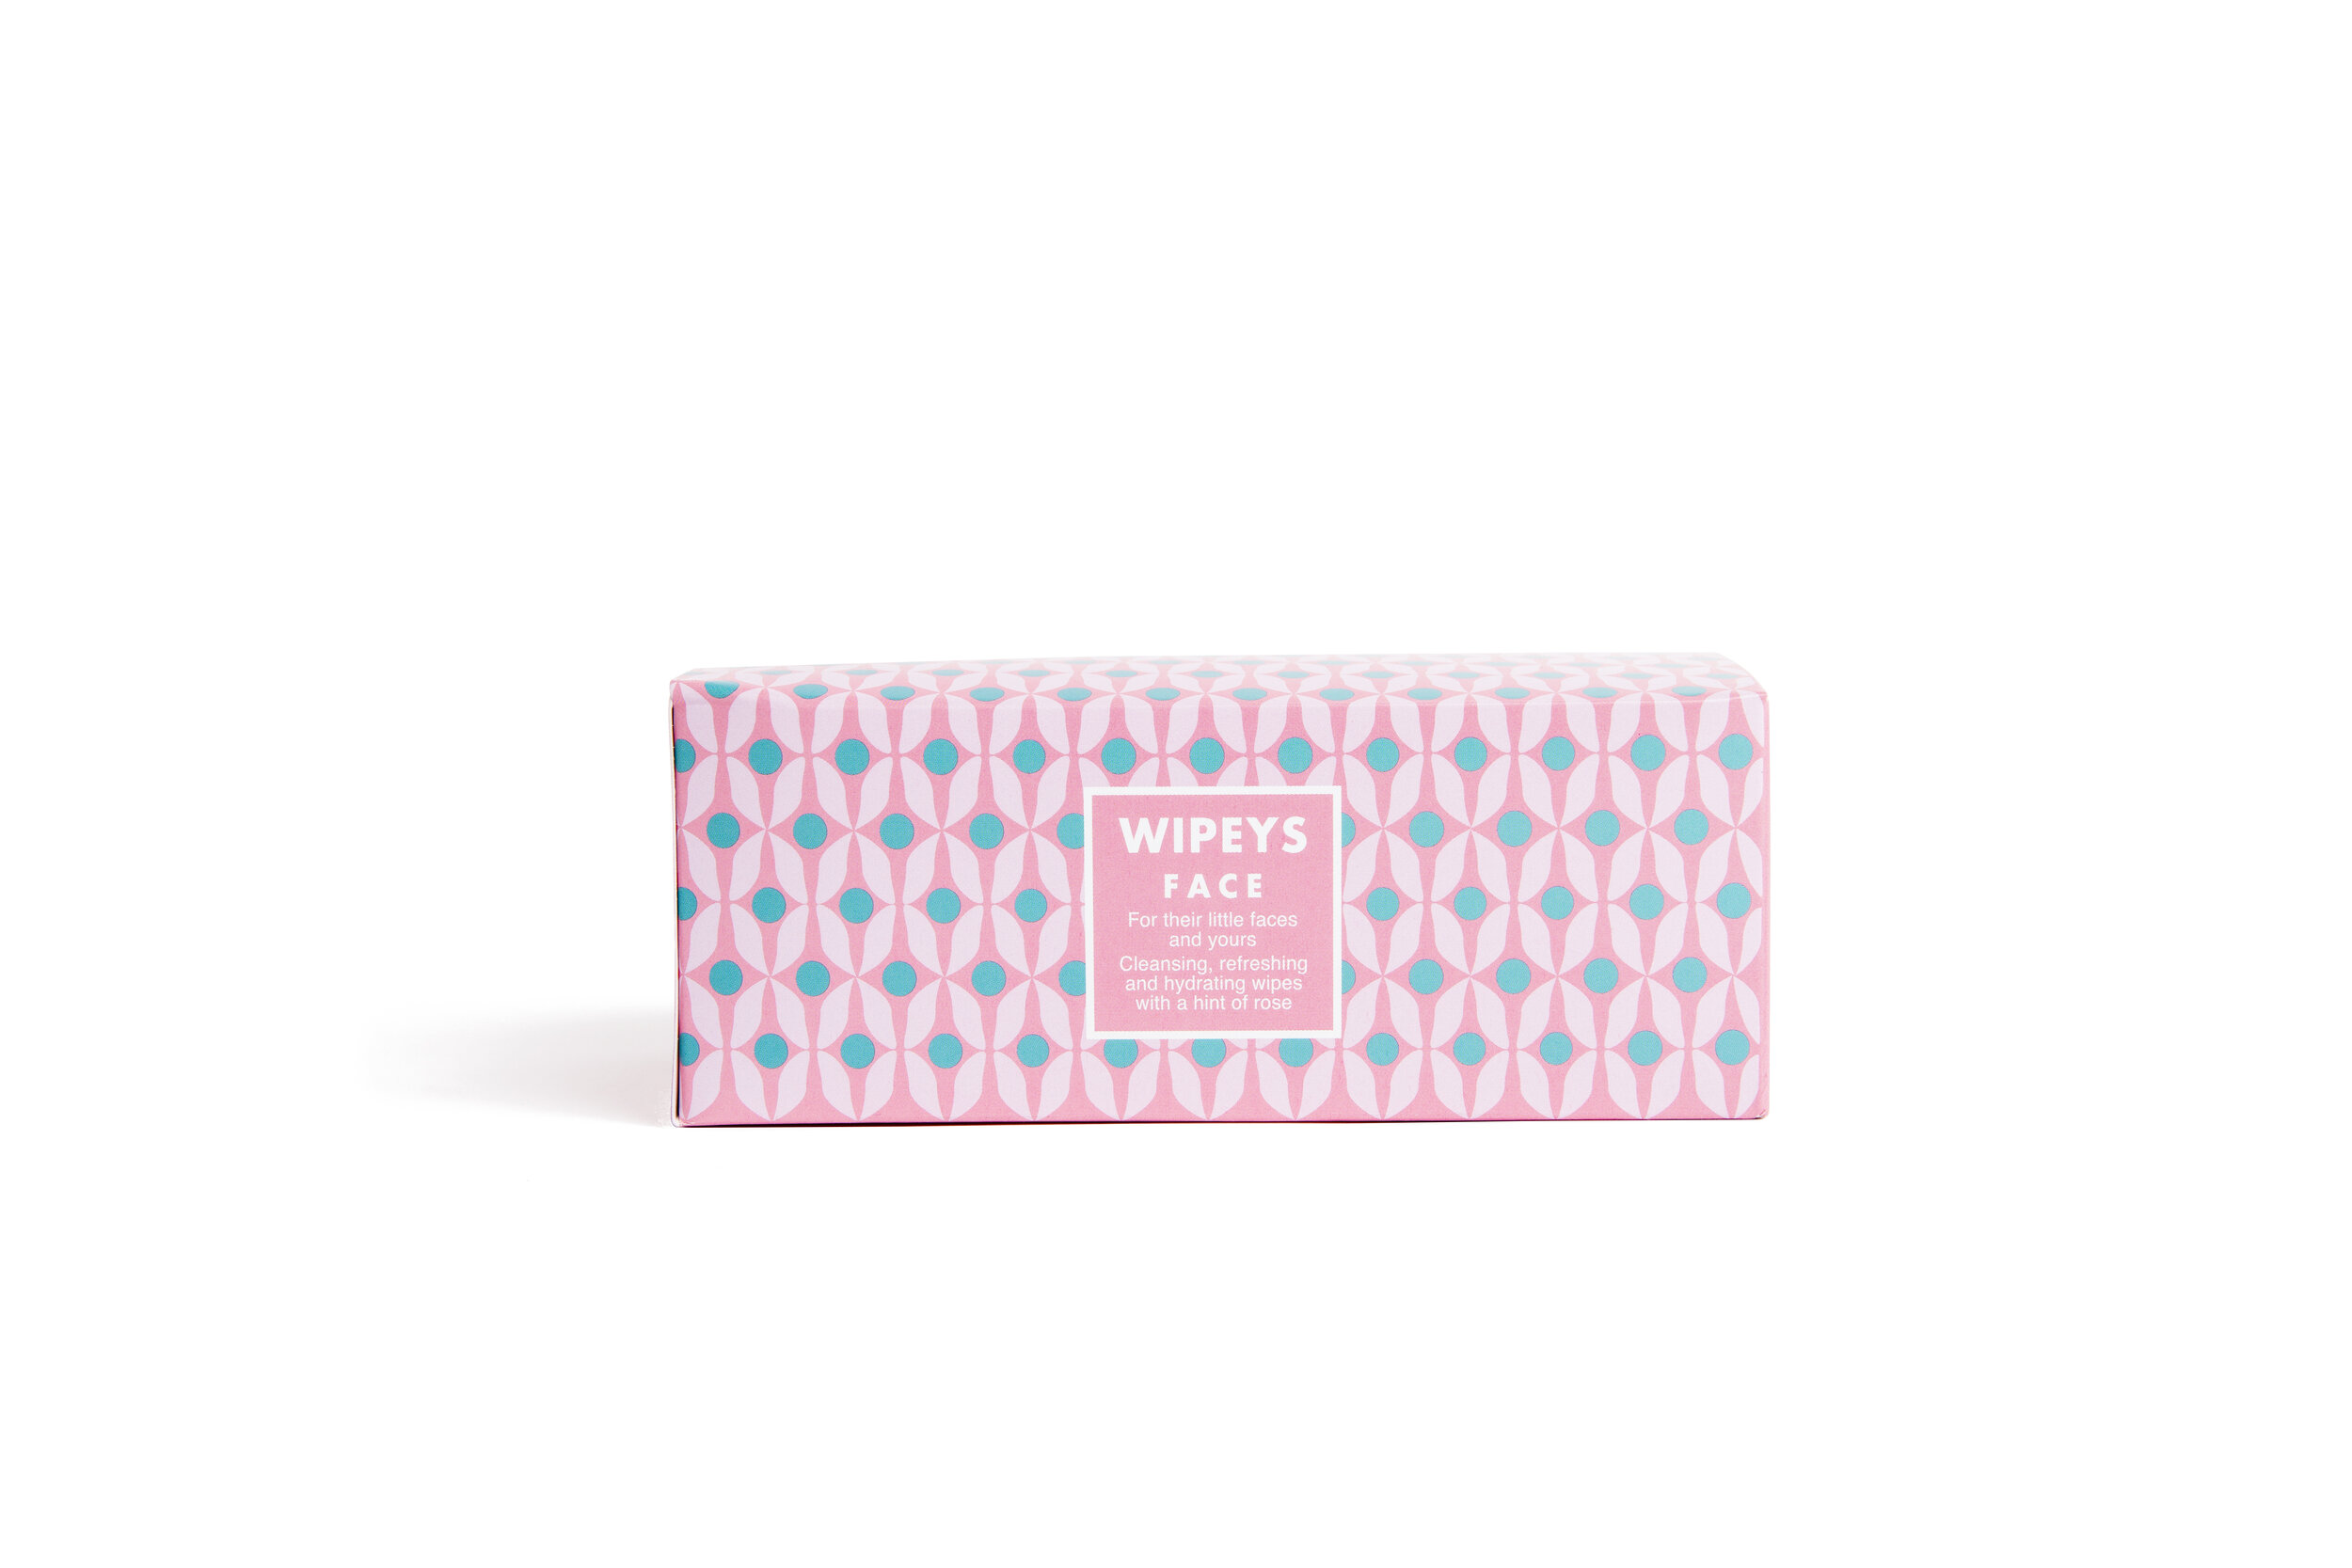 The Ritual of Namaste Miracle Wipes - Travel - cleansing wipes